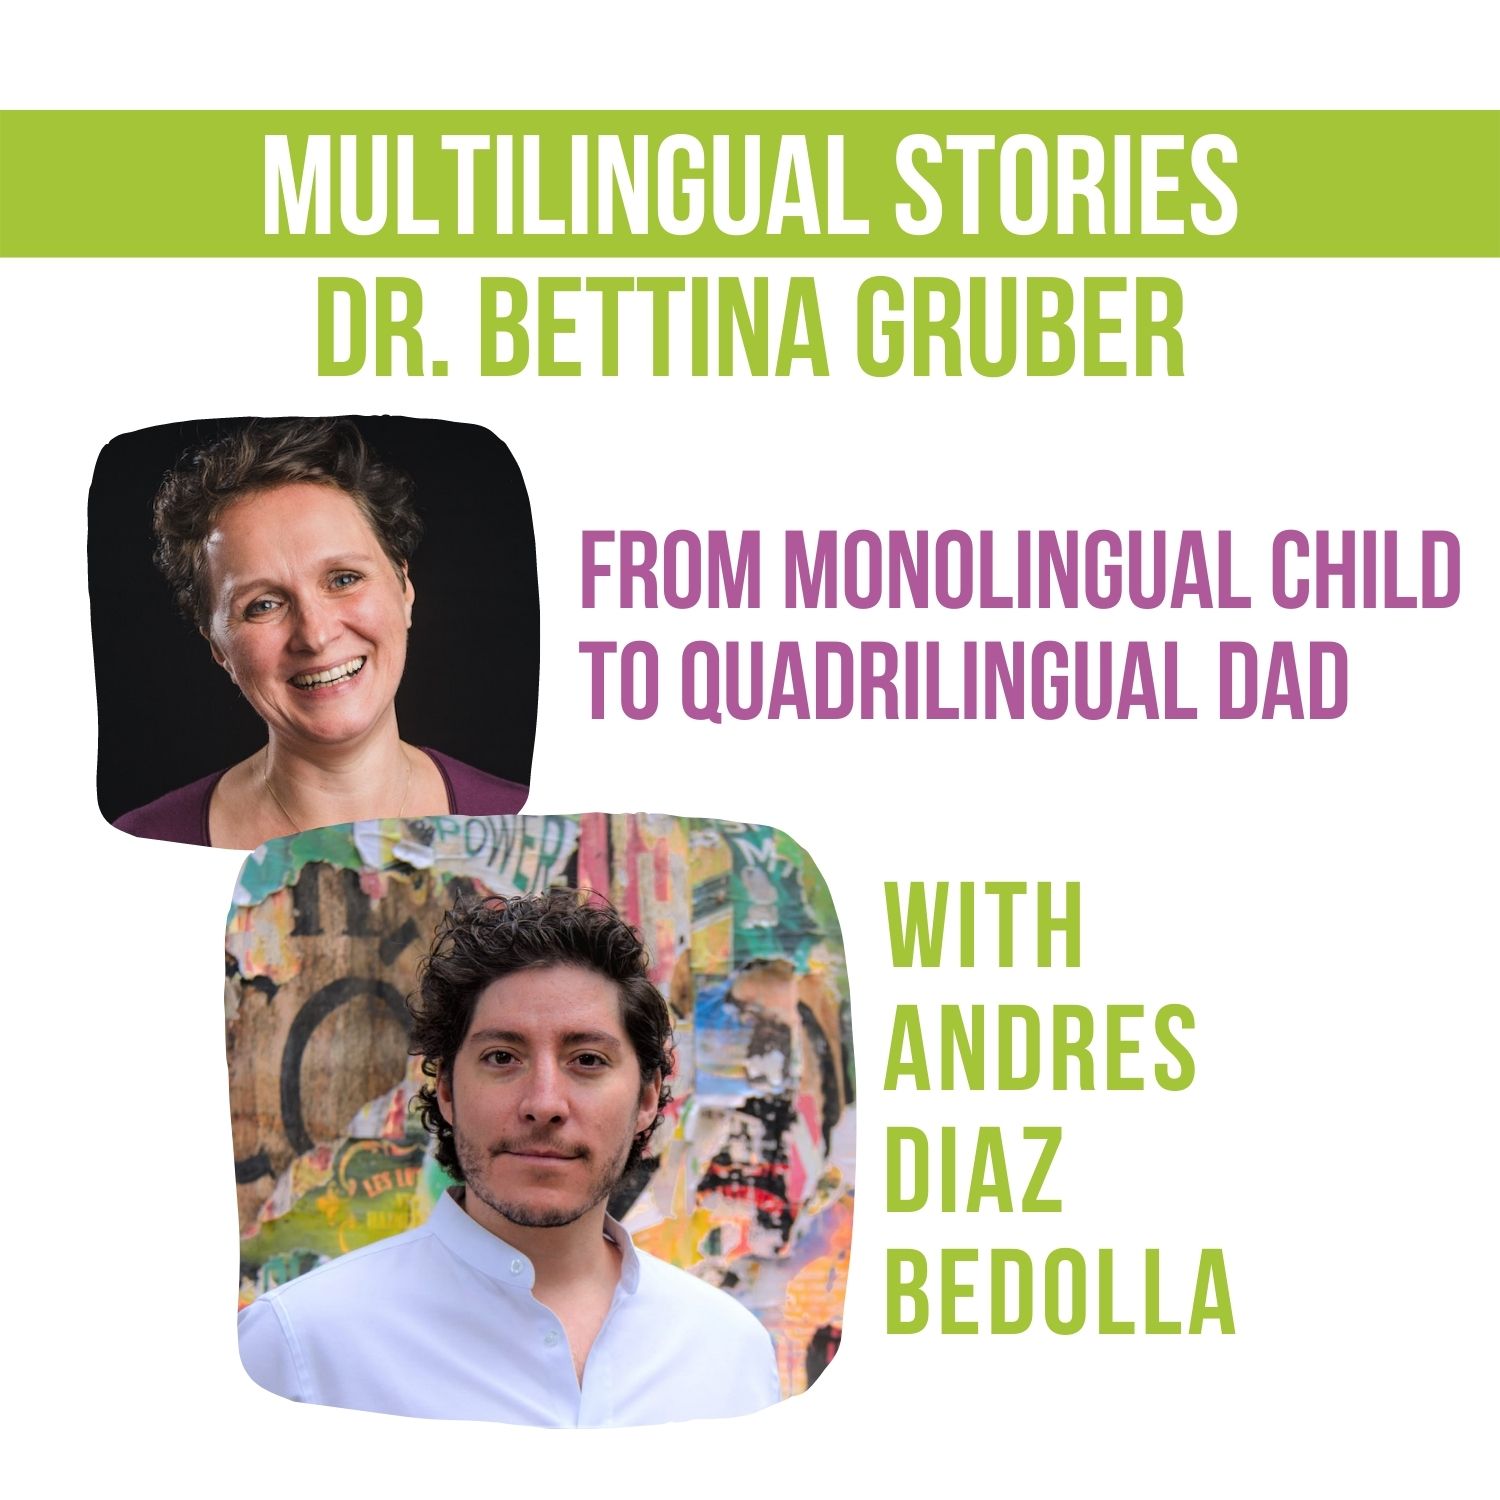 From monolingual child to quadrilingual dad | an interview with Andres Diaz Bedolla